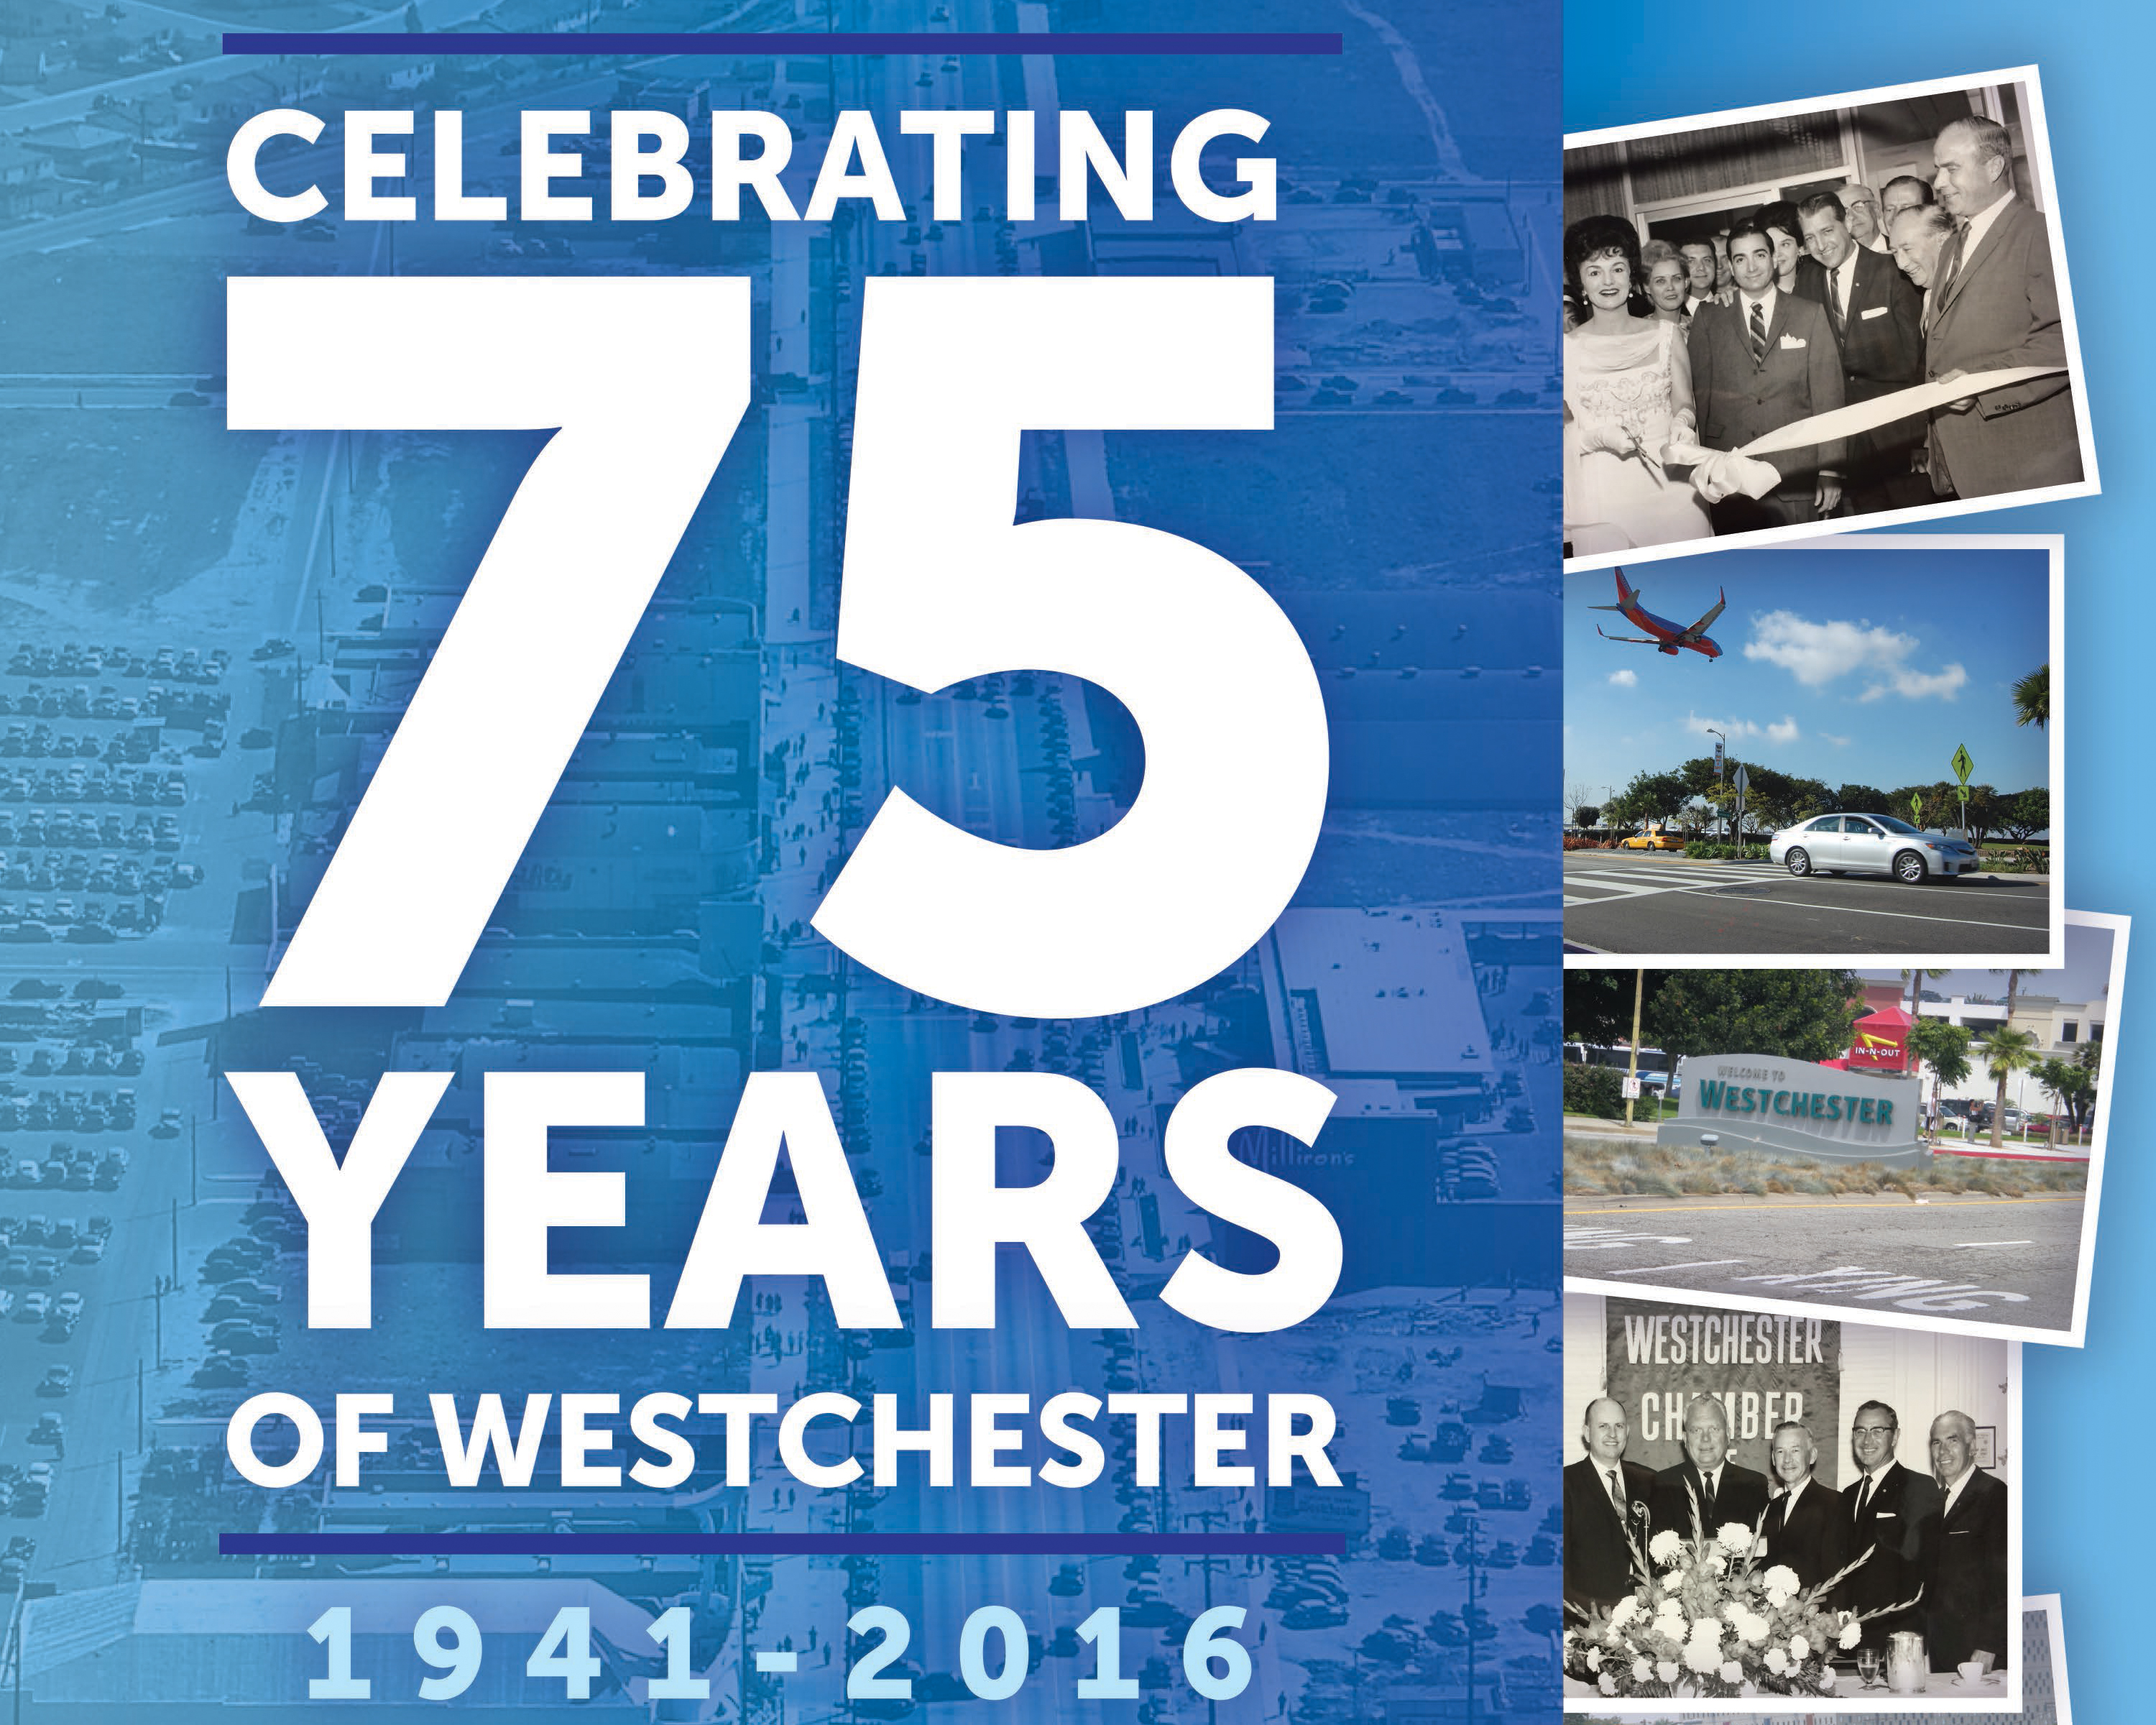 “Our Little Piece of Paradise: Celebrating 75 Years of Westchester”